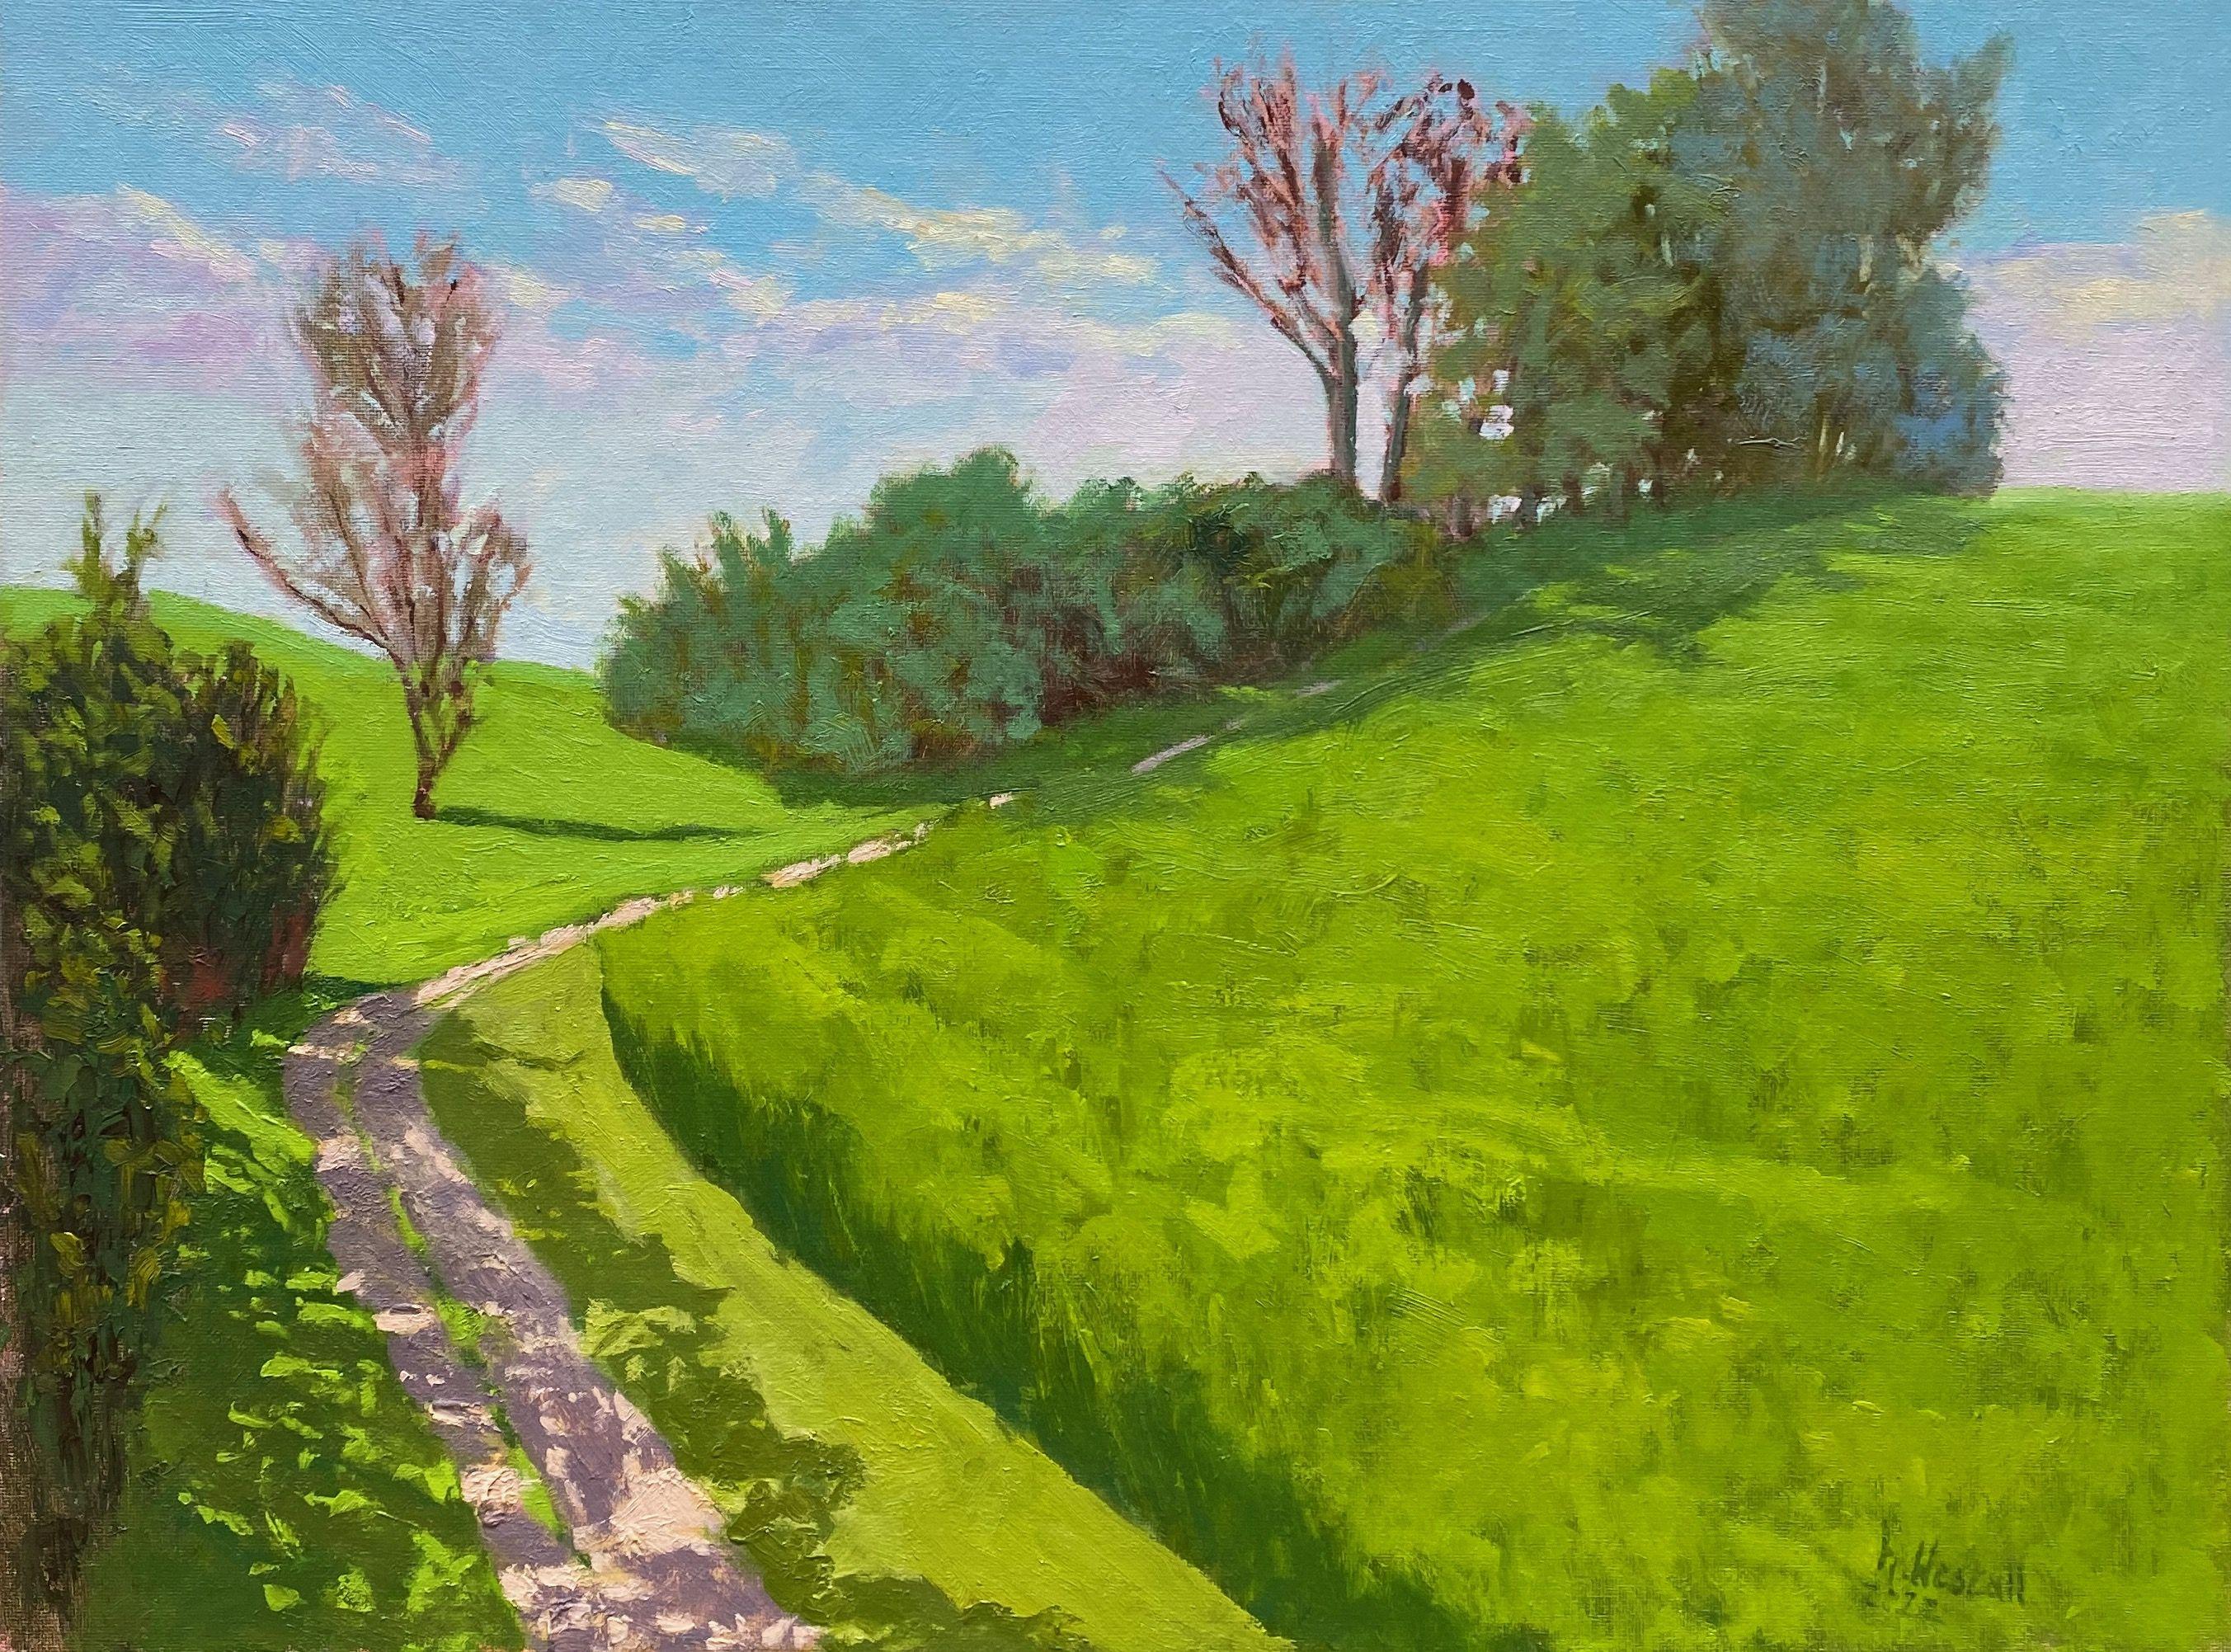 Painted at the Plein air Festival 2022 in Kuehlungsborn.  This is a country lane leading to the Baltic Sea over the Hill, below the Bastorf Lighthouse.  The play of light at the edge of the field fascinated me and prompted me to paint this painting.